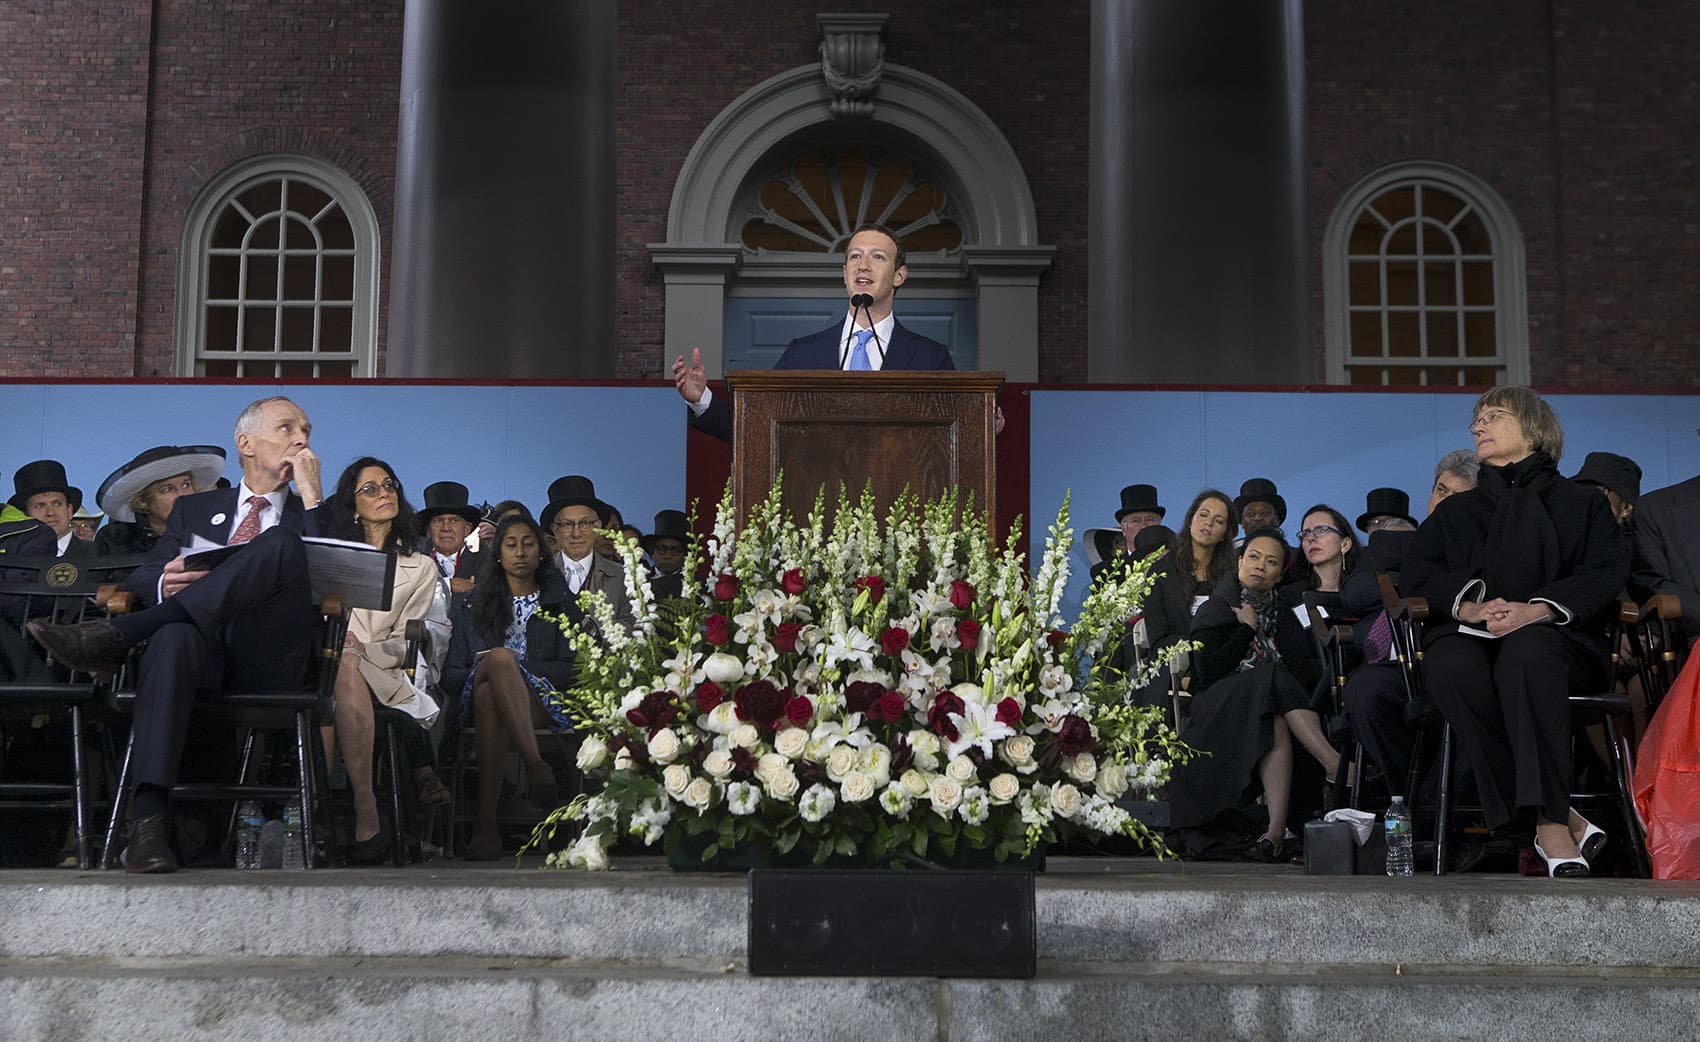 Facebook CEO Mark Zuckerberg gave Harvard's commencement address Thursday afternoon. Zuckerberg created the social media site in his Harvard dorm room in 2004. He dropped out in 2005 to further the company. (Jesse Costa/WBUR)